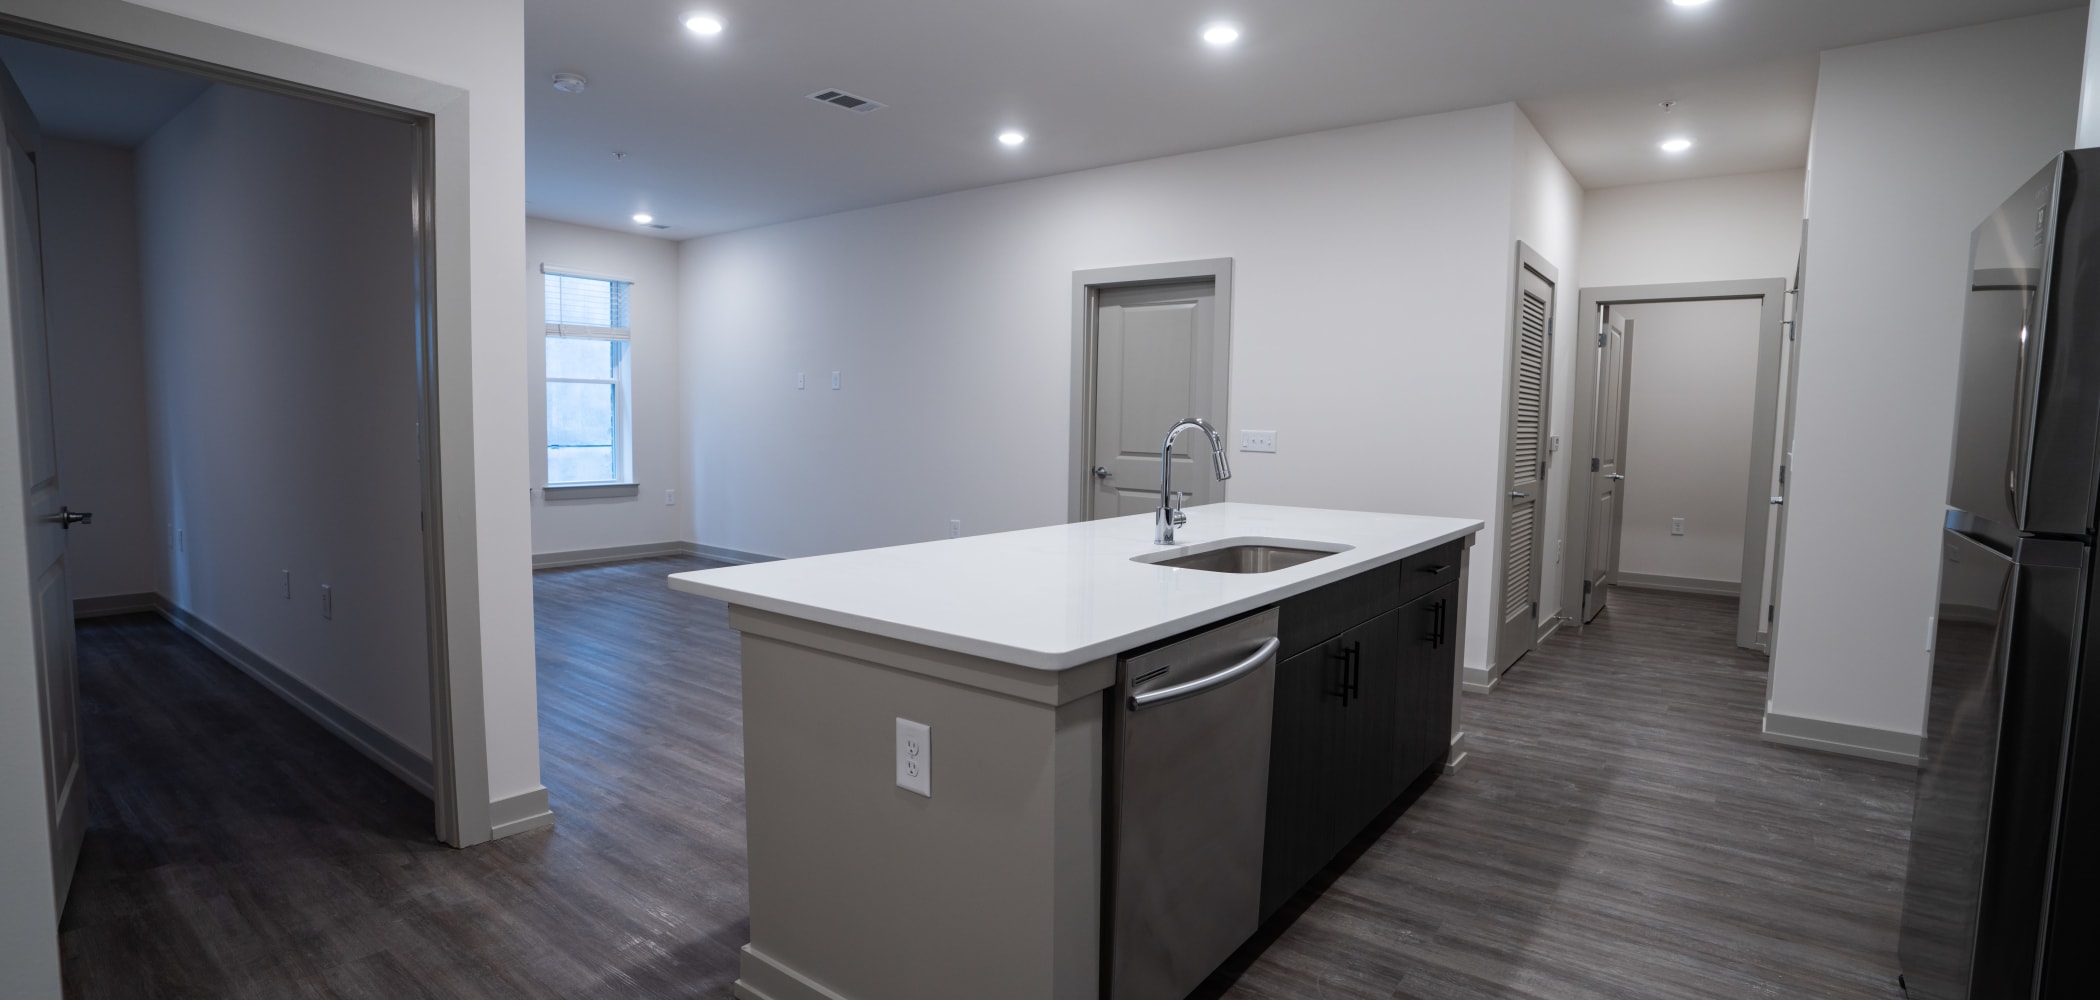 Modern Kitchen & Living Room at The Jolly Roger | Student Housing in Greenville, North Carolina